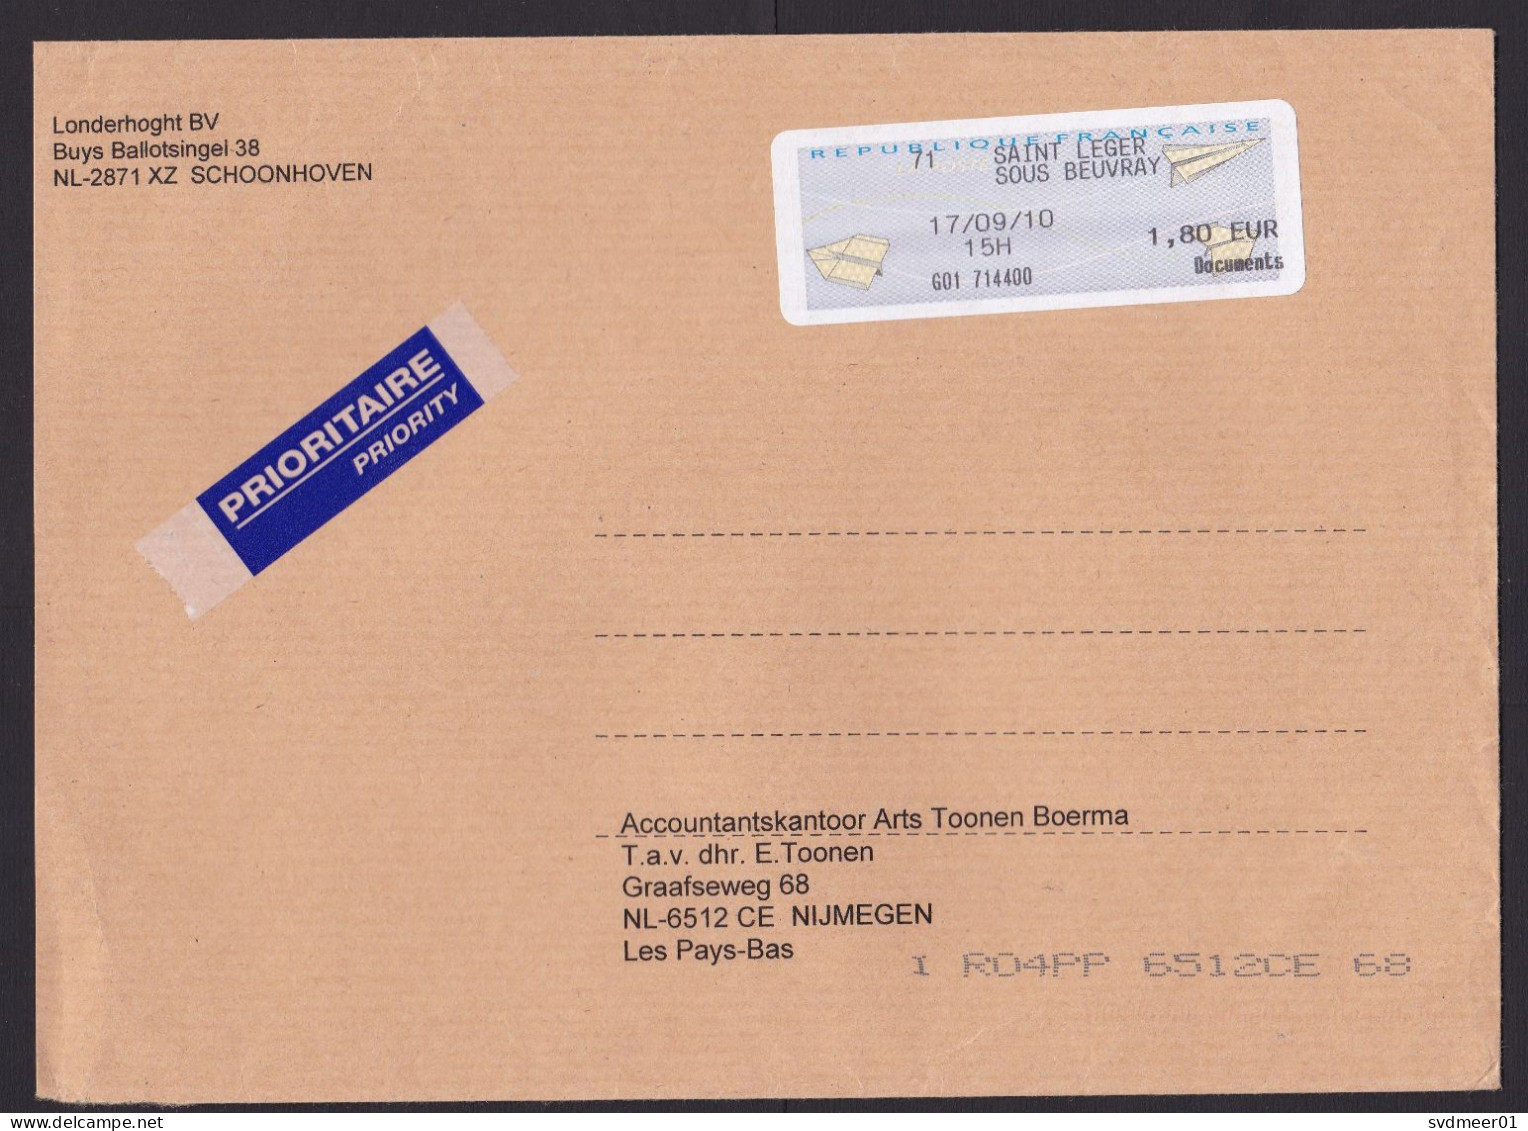 France: Priority Cover To Netherlands, 2010, ATM Machine Label, 1.80 Documents Rate, Saint Leger (traces Of Use) - Covers & Documents